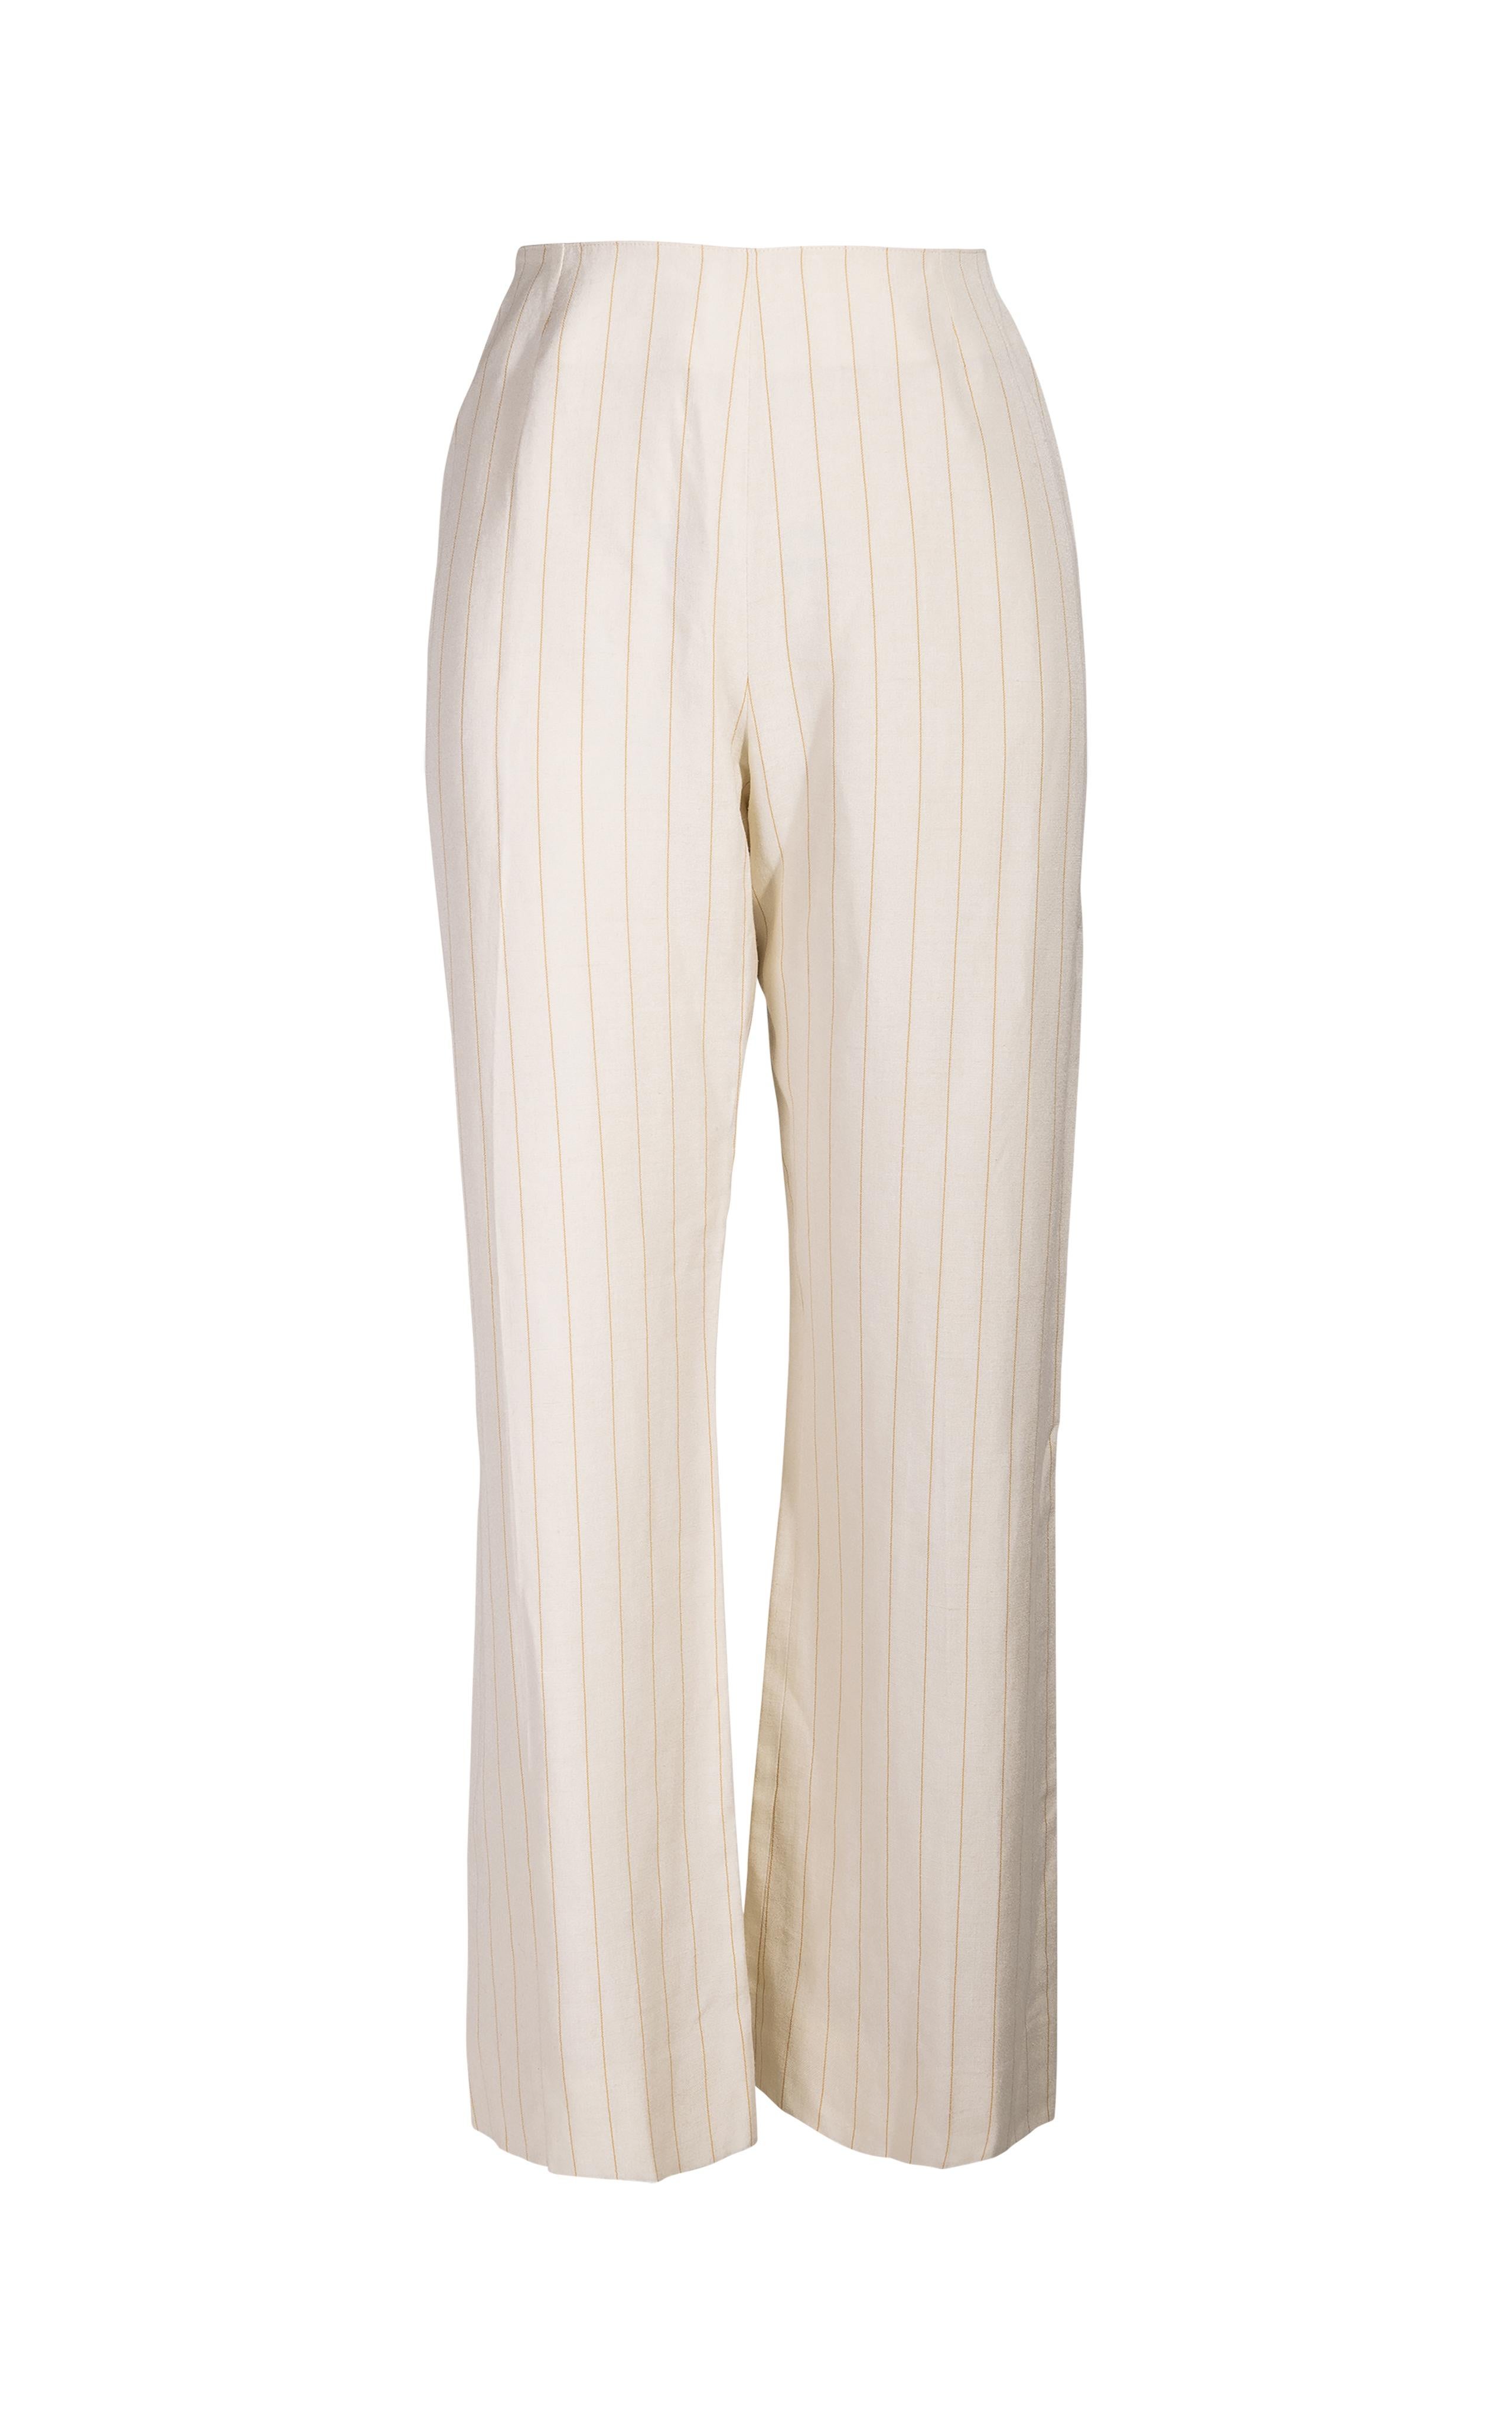 1980's Thierry Mugler Striped Pantsuit 1